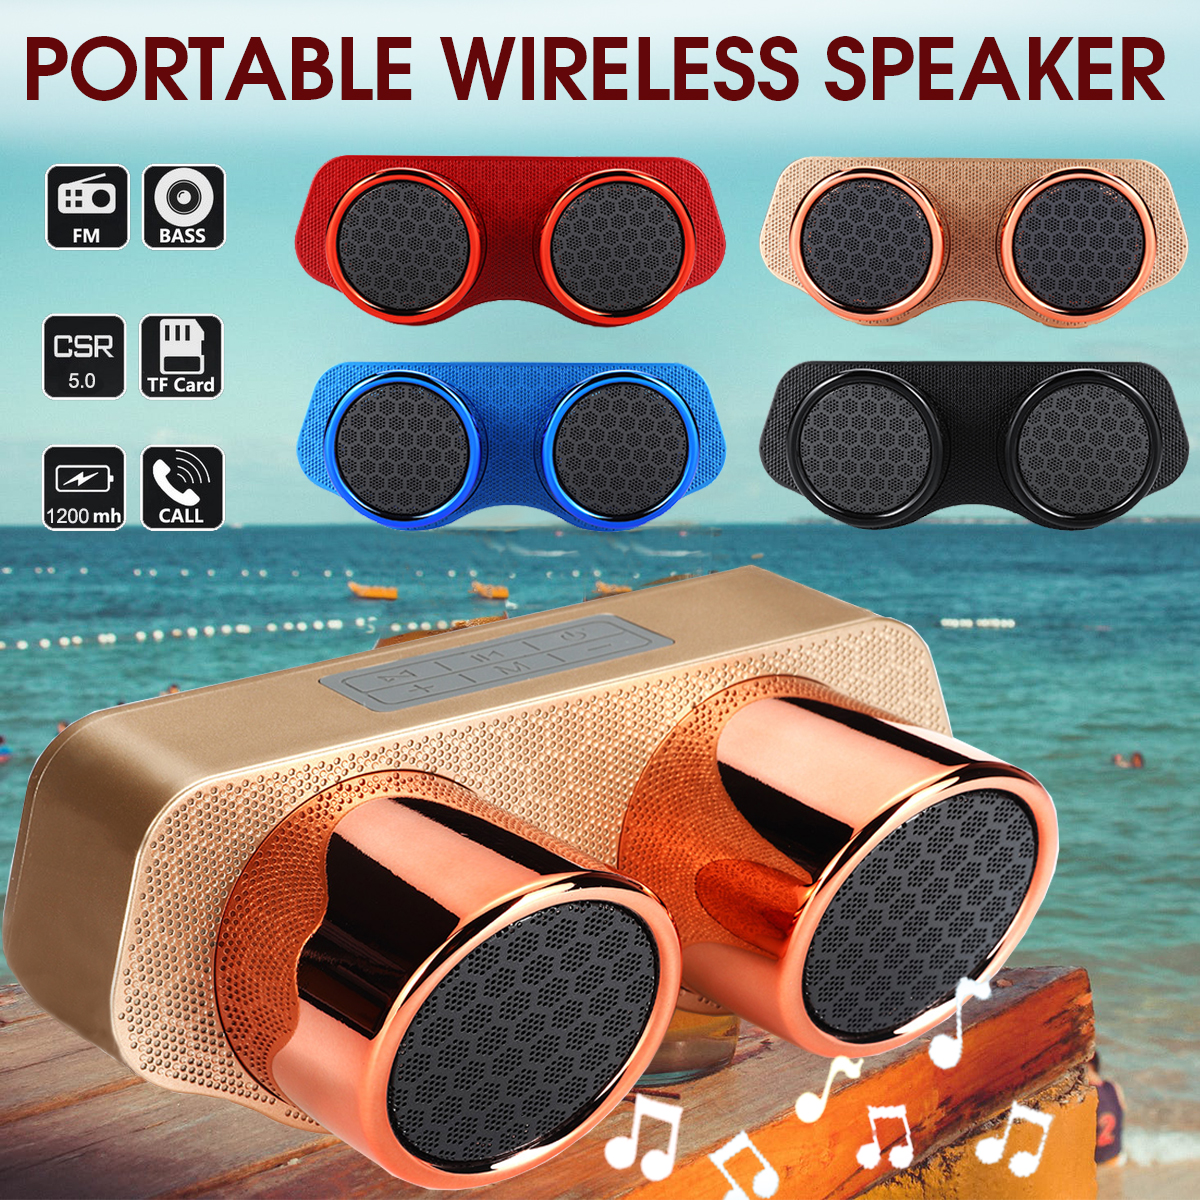 Rechargeable-Portable-Wireless-bluetooth-Speaker-FM-Radio-TF-Card-CSR50-Super-Bass-Sound-Stereo-Spea-1427727-1